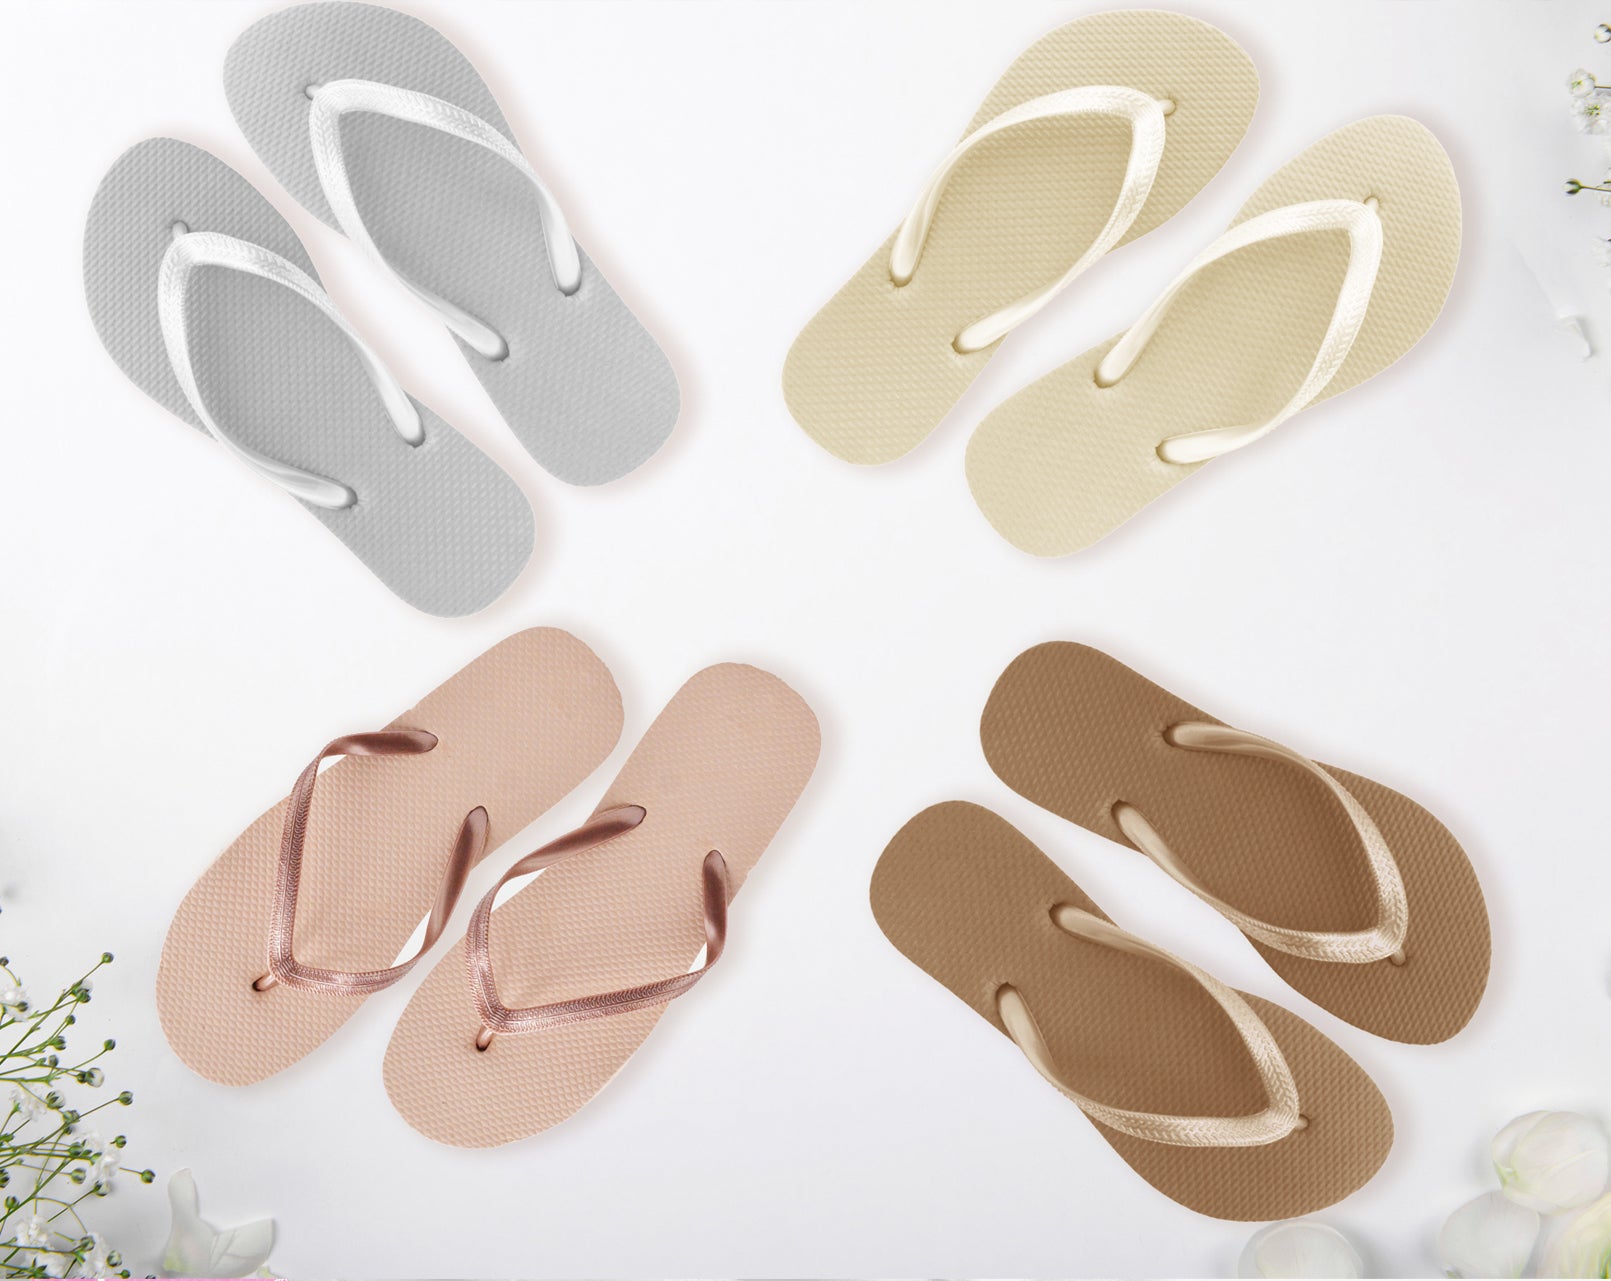 24-120 Pairs Wedding Flip Flops for Guests Soft Wedding Sandals Bulk Hotel  Spa Slippers with Size Cards Pool Shower Party Favors